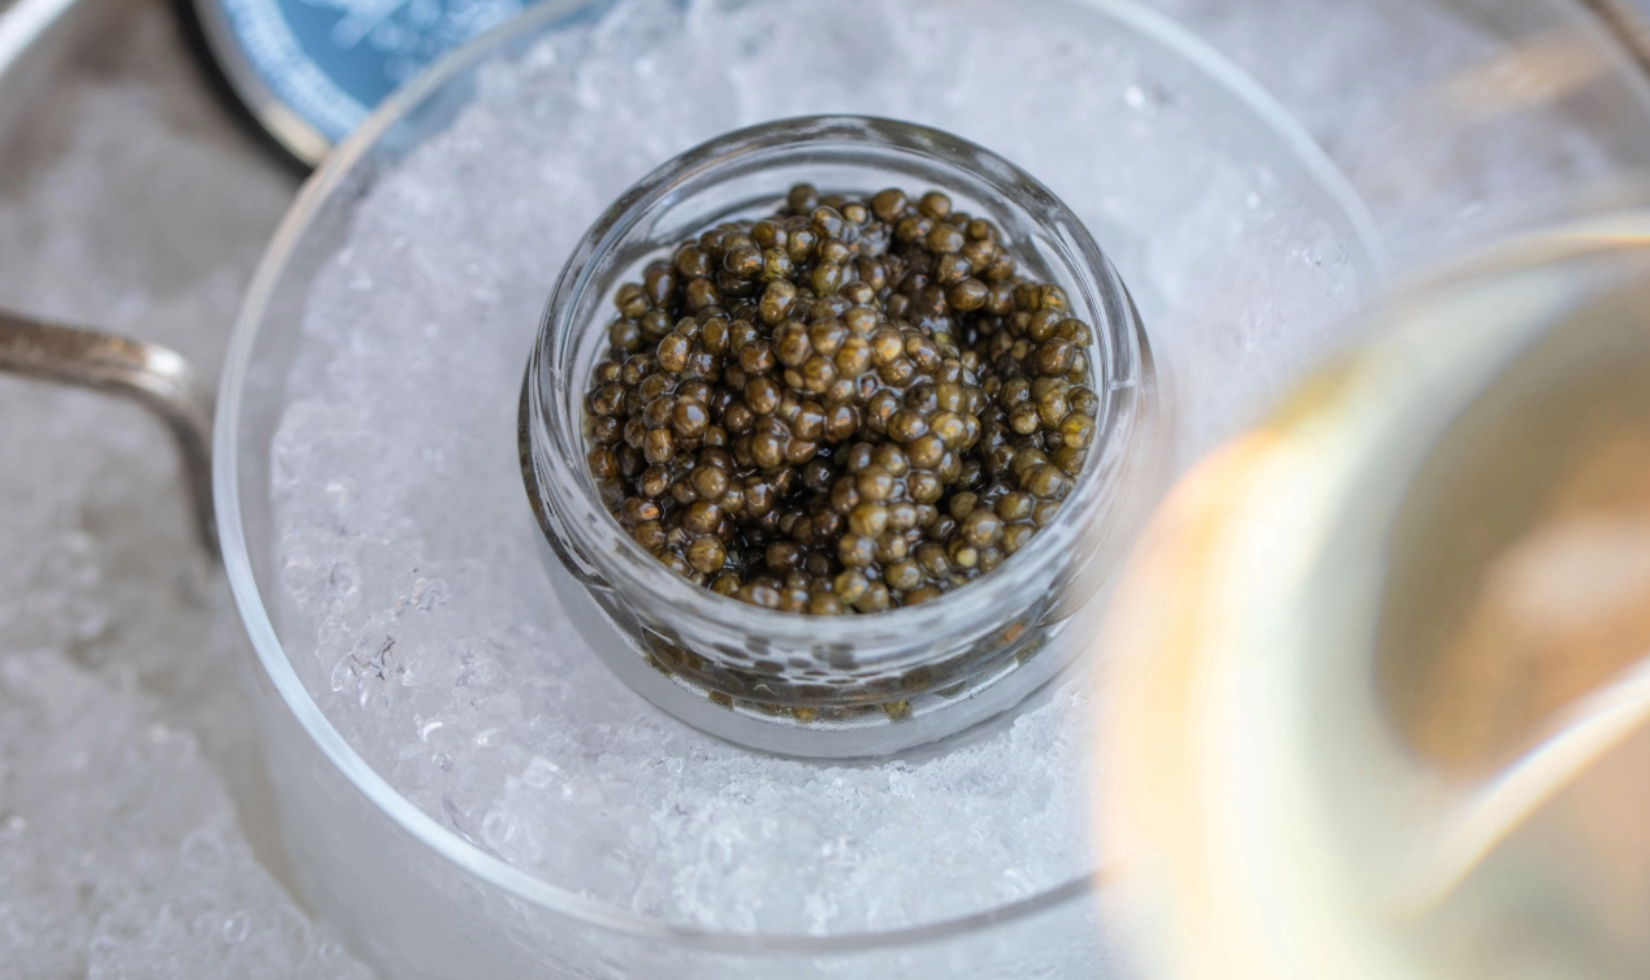 closeup image of caviar in glass jar resting on tray filled with ice